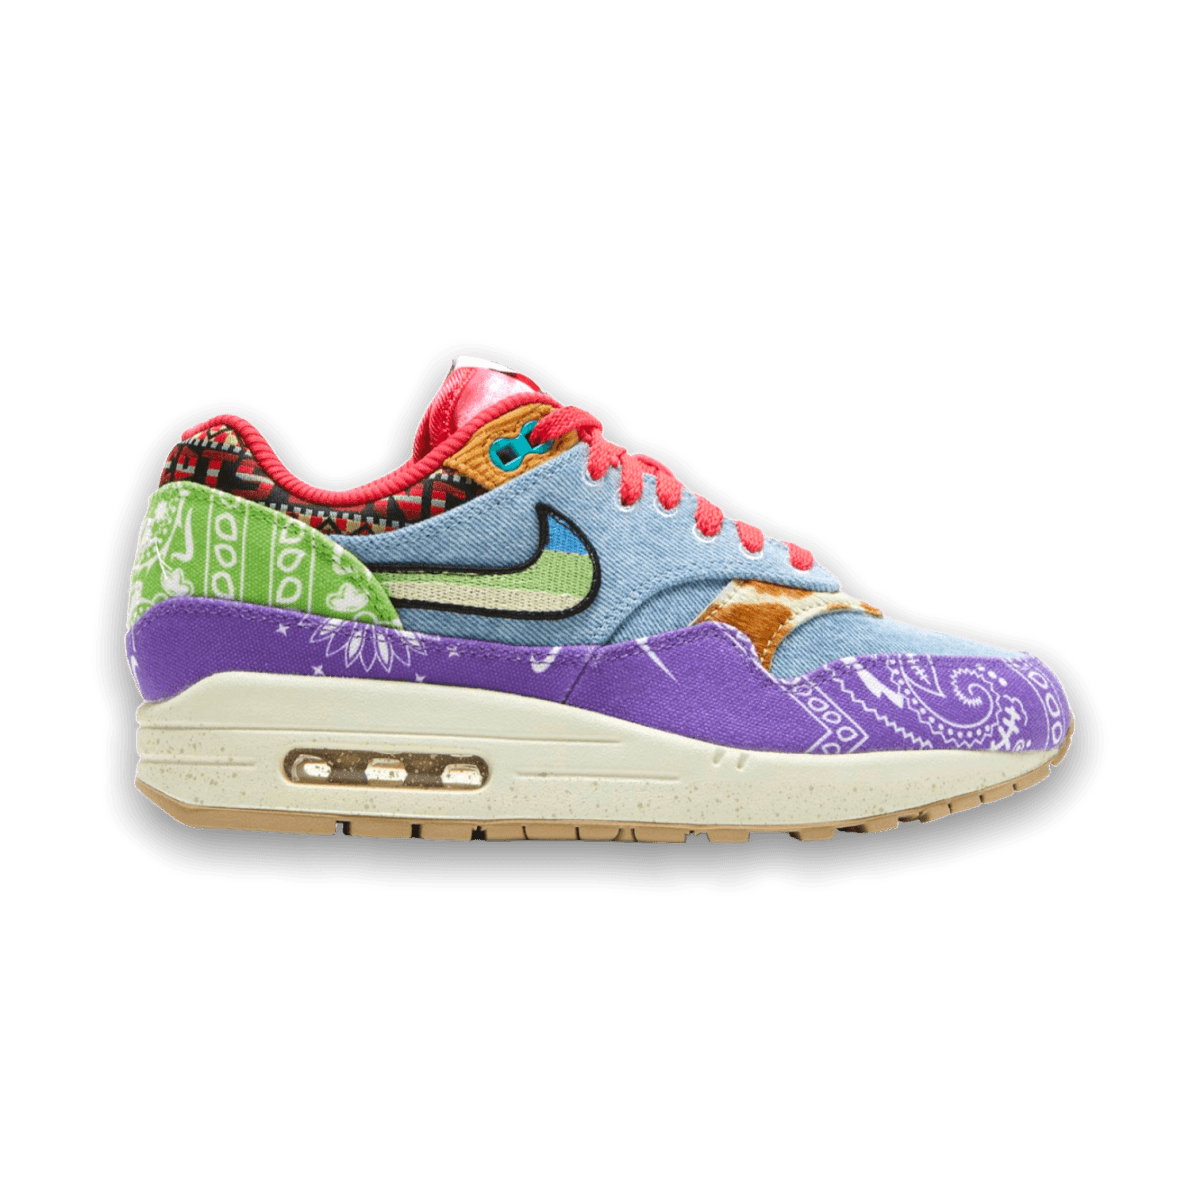 Air Max 1 SP Concepts Far Out (Special Box) - Low Sneaker - Nike - Jawns on Fire